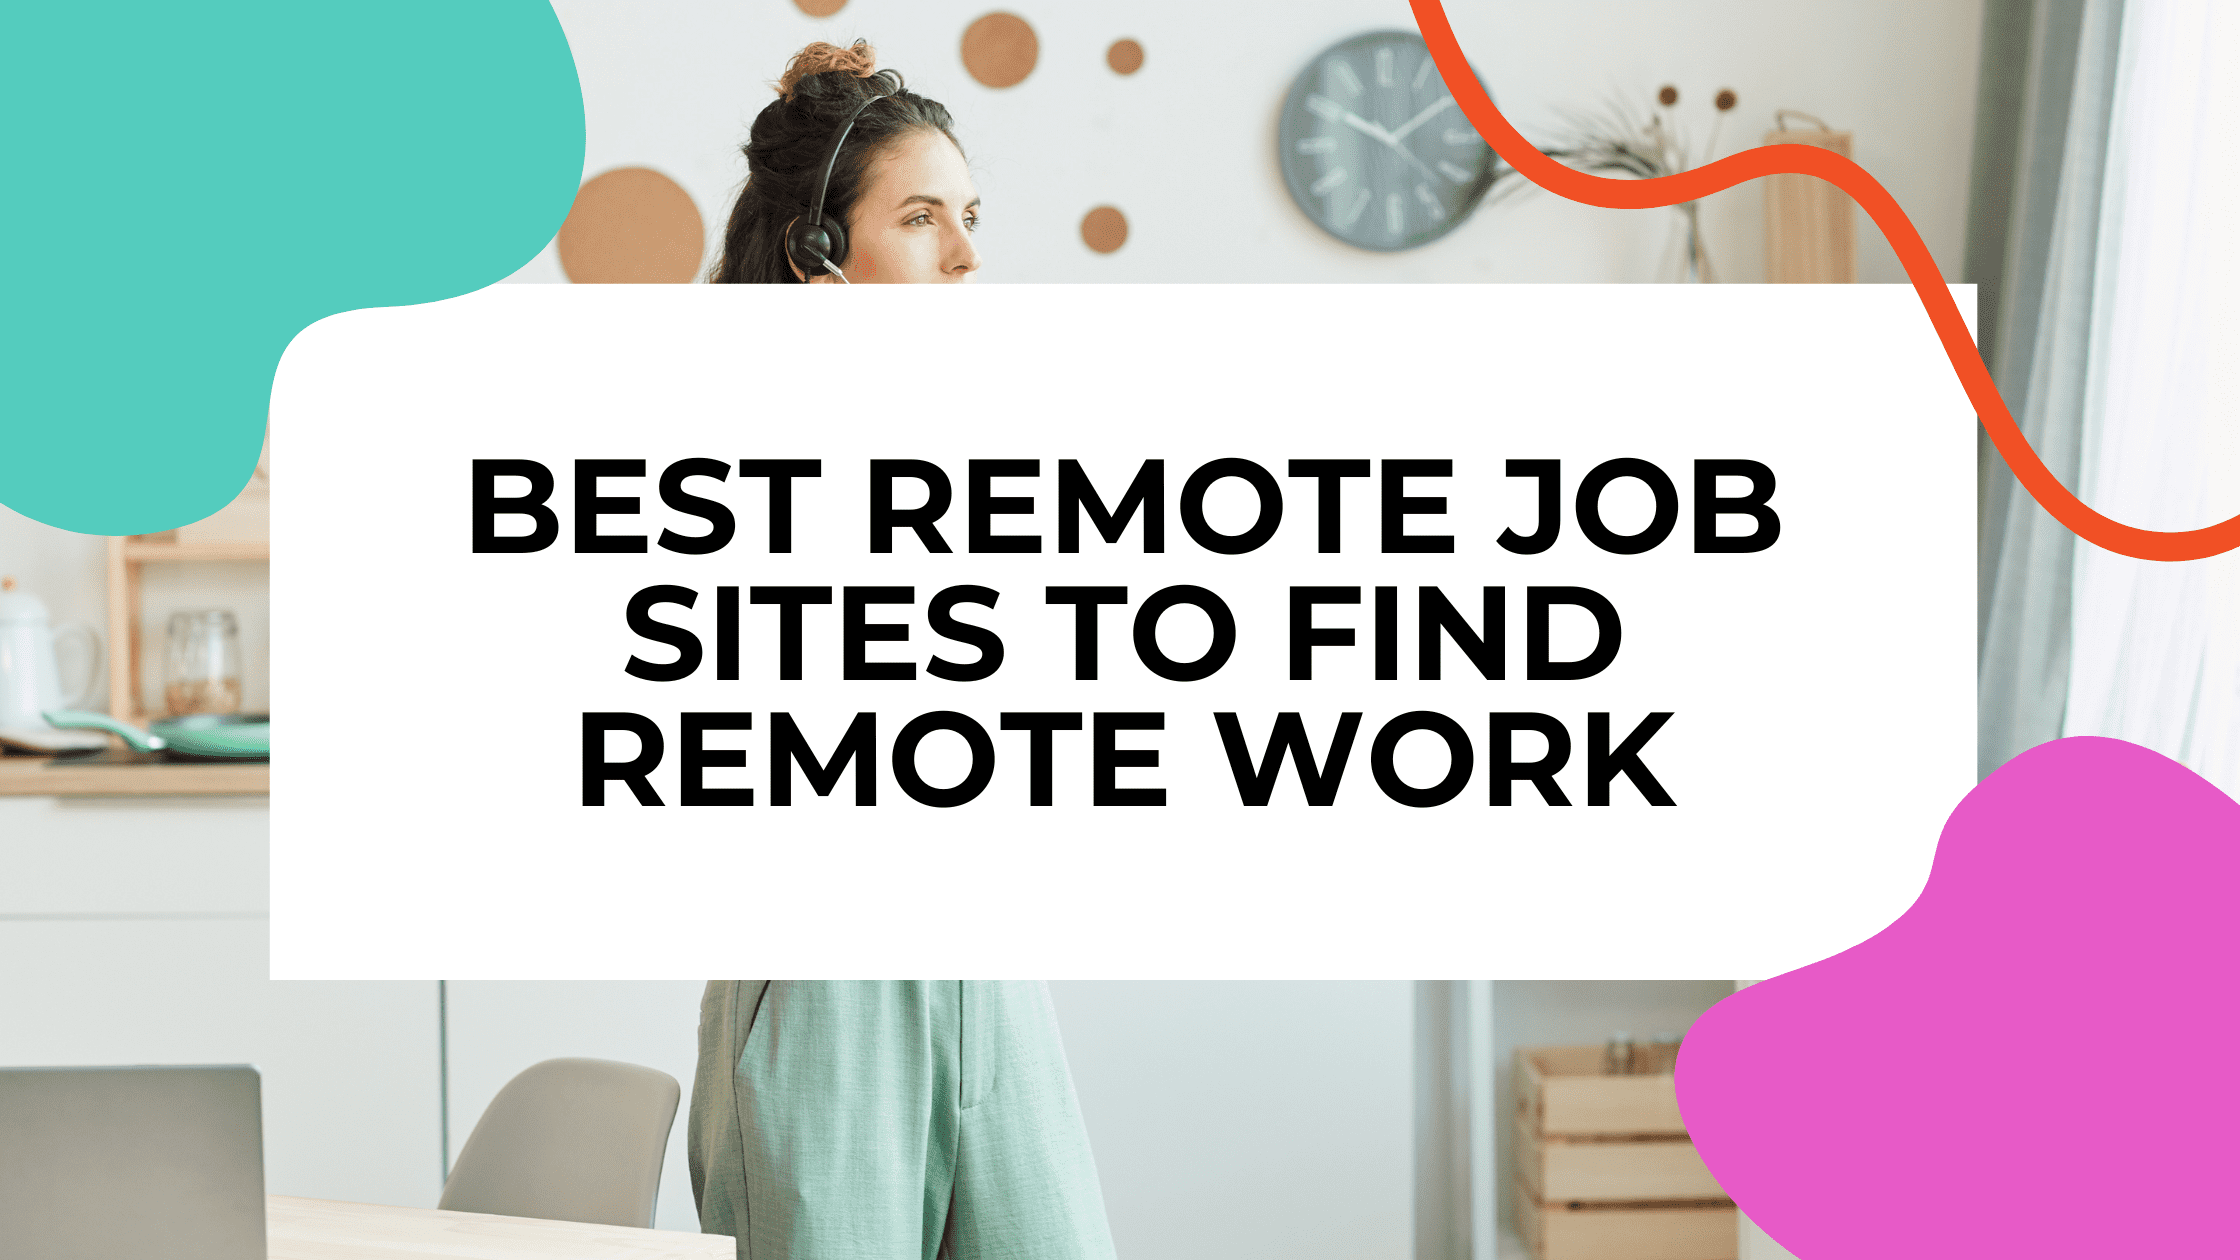 best remote job sites featured image with a remote worker on the phone and title text overlay